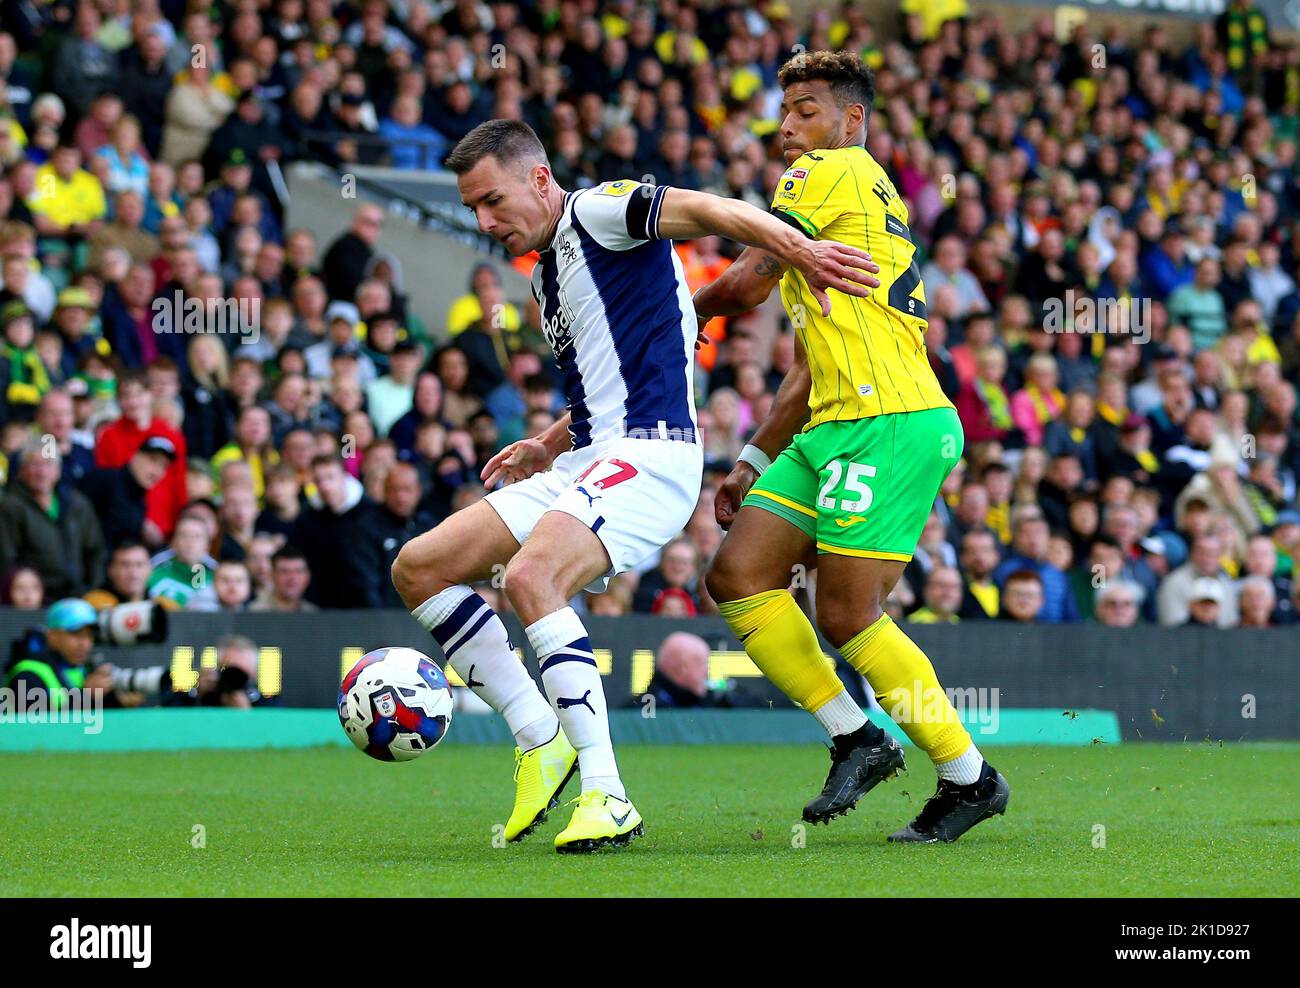 Norwich City's Onel Hernandez (right) and West Bromwich Albion's Jed Wallace battle for the ball during the Sky Bet Championship match at Carrow Road, Norwich. Picture date: Saturday September 17, 2022. Stock Photo